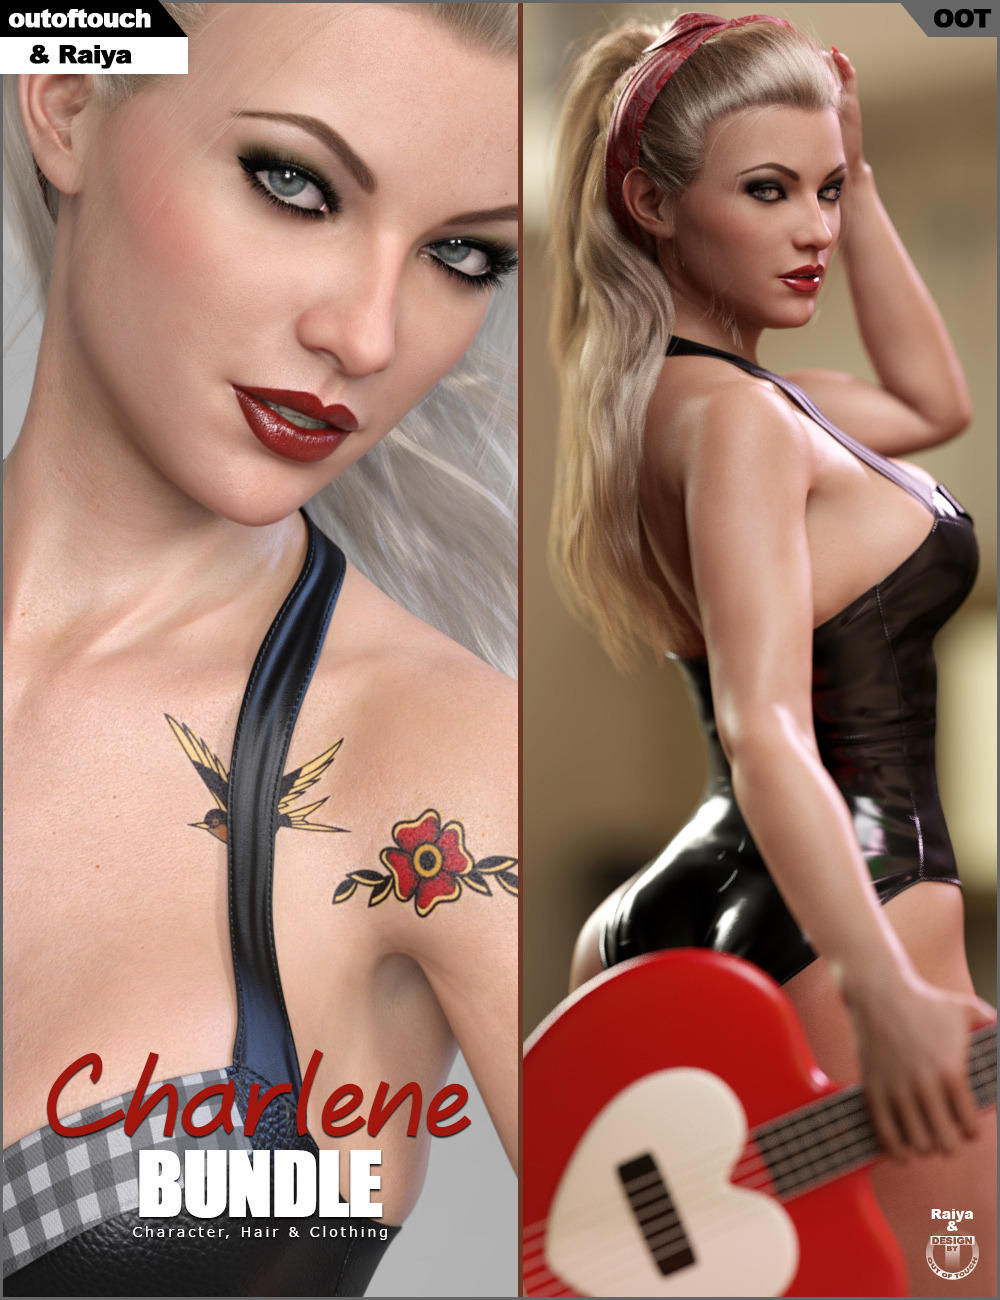 Charlene Character, Hair & Clothing Bundle by: Raiyaoutoftouch, 3D Models by Daz 3D